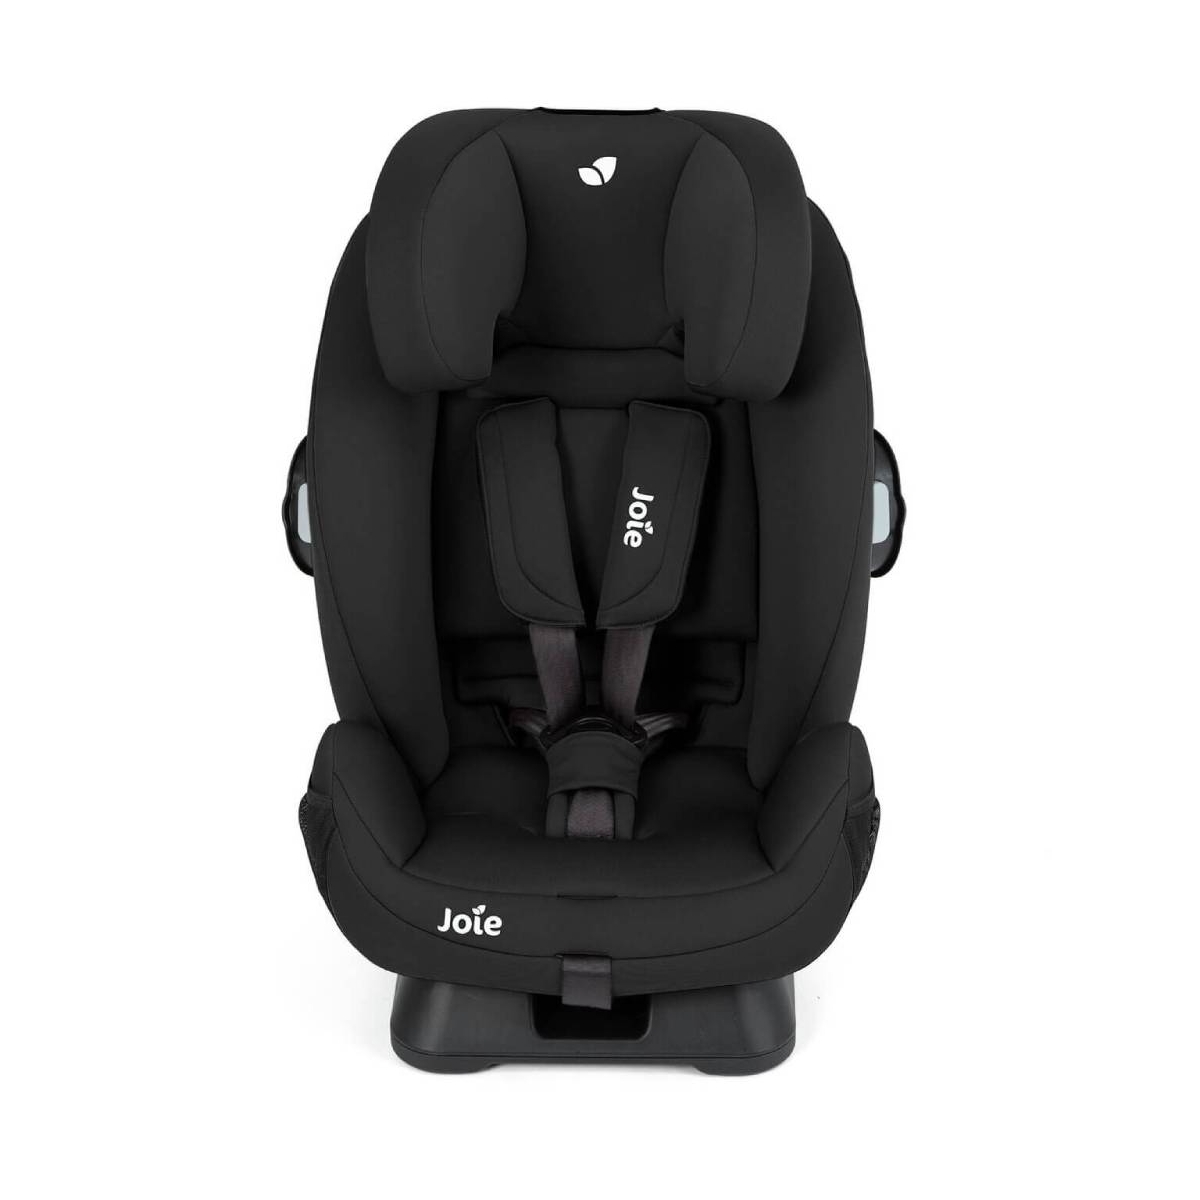 Joie Every Stage I-Size 0+/1/2/3 Car Seat